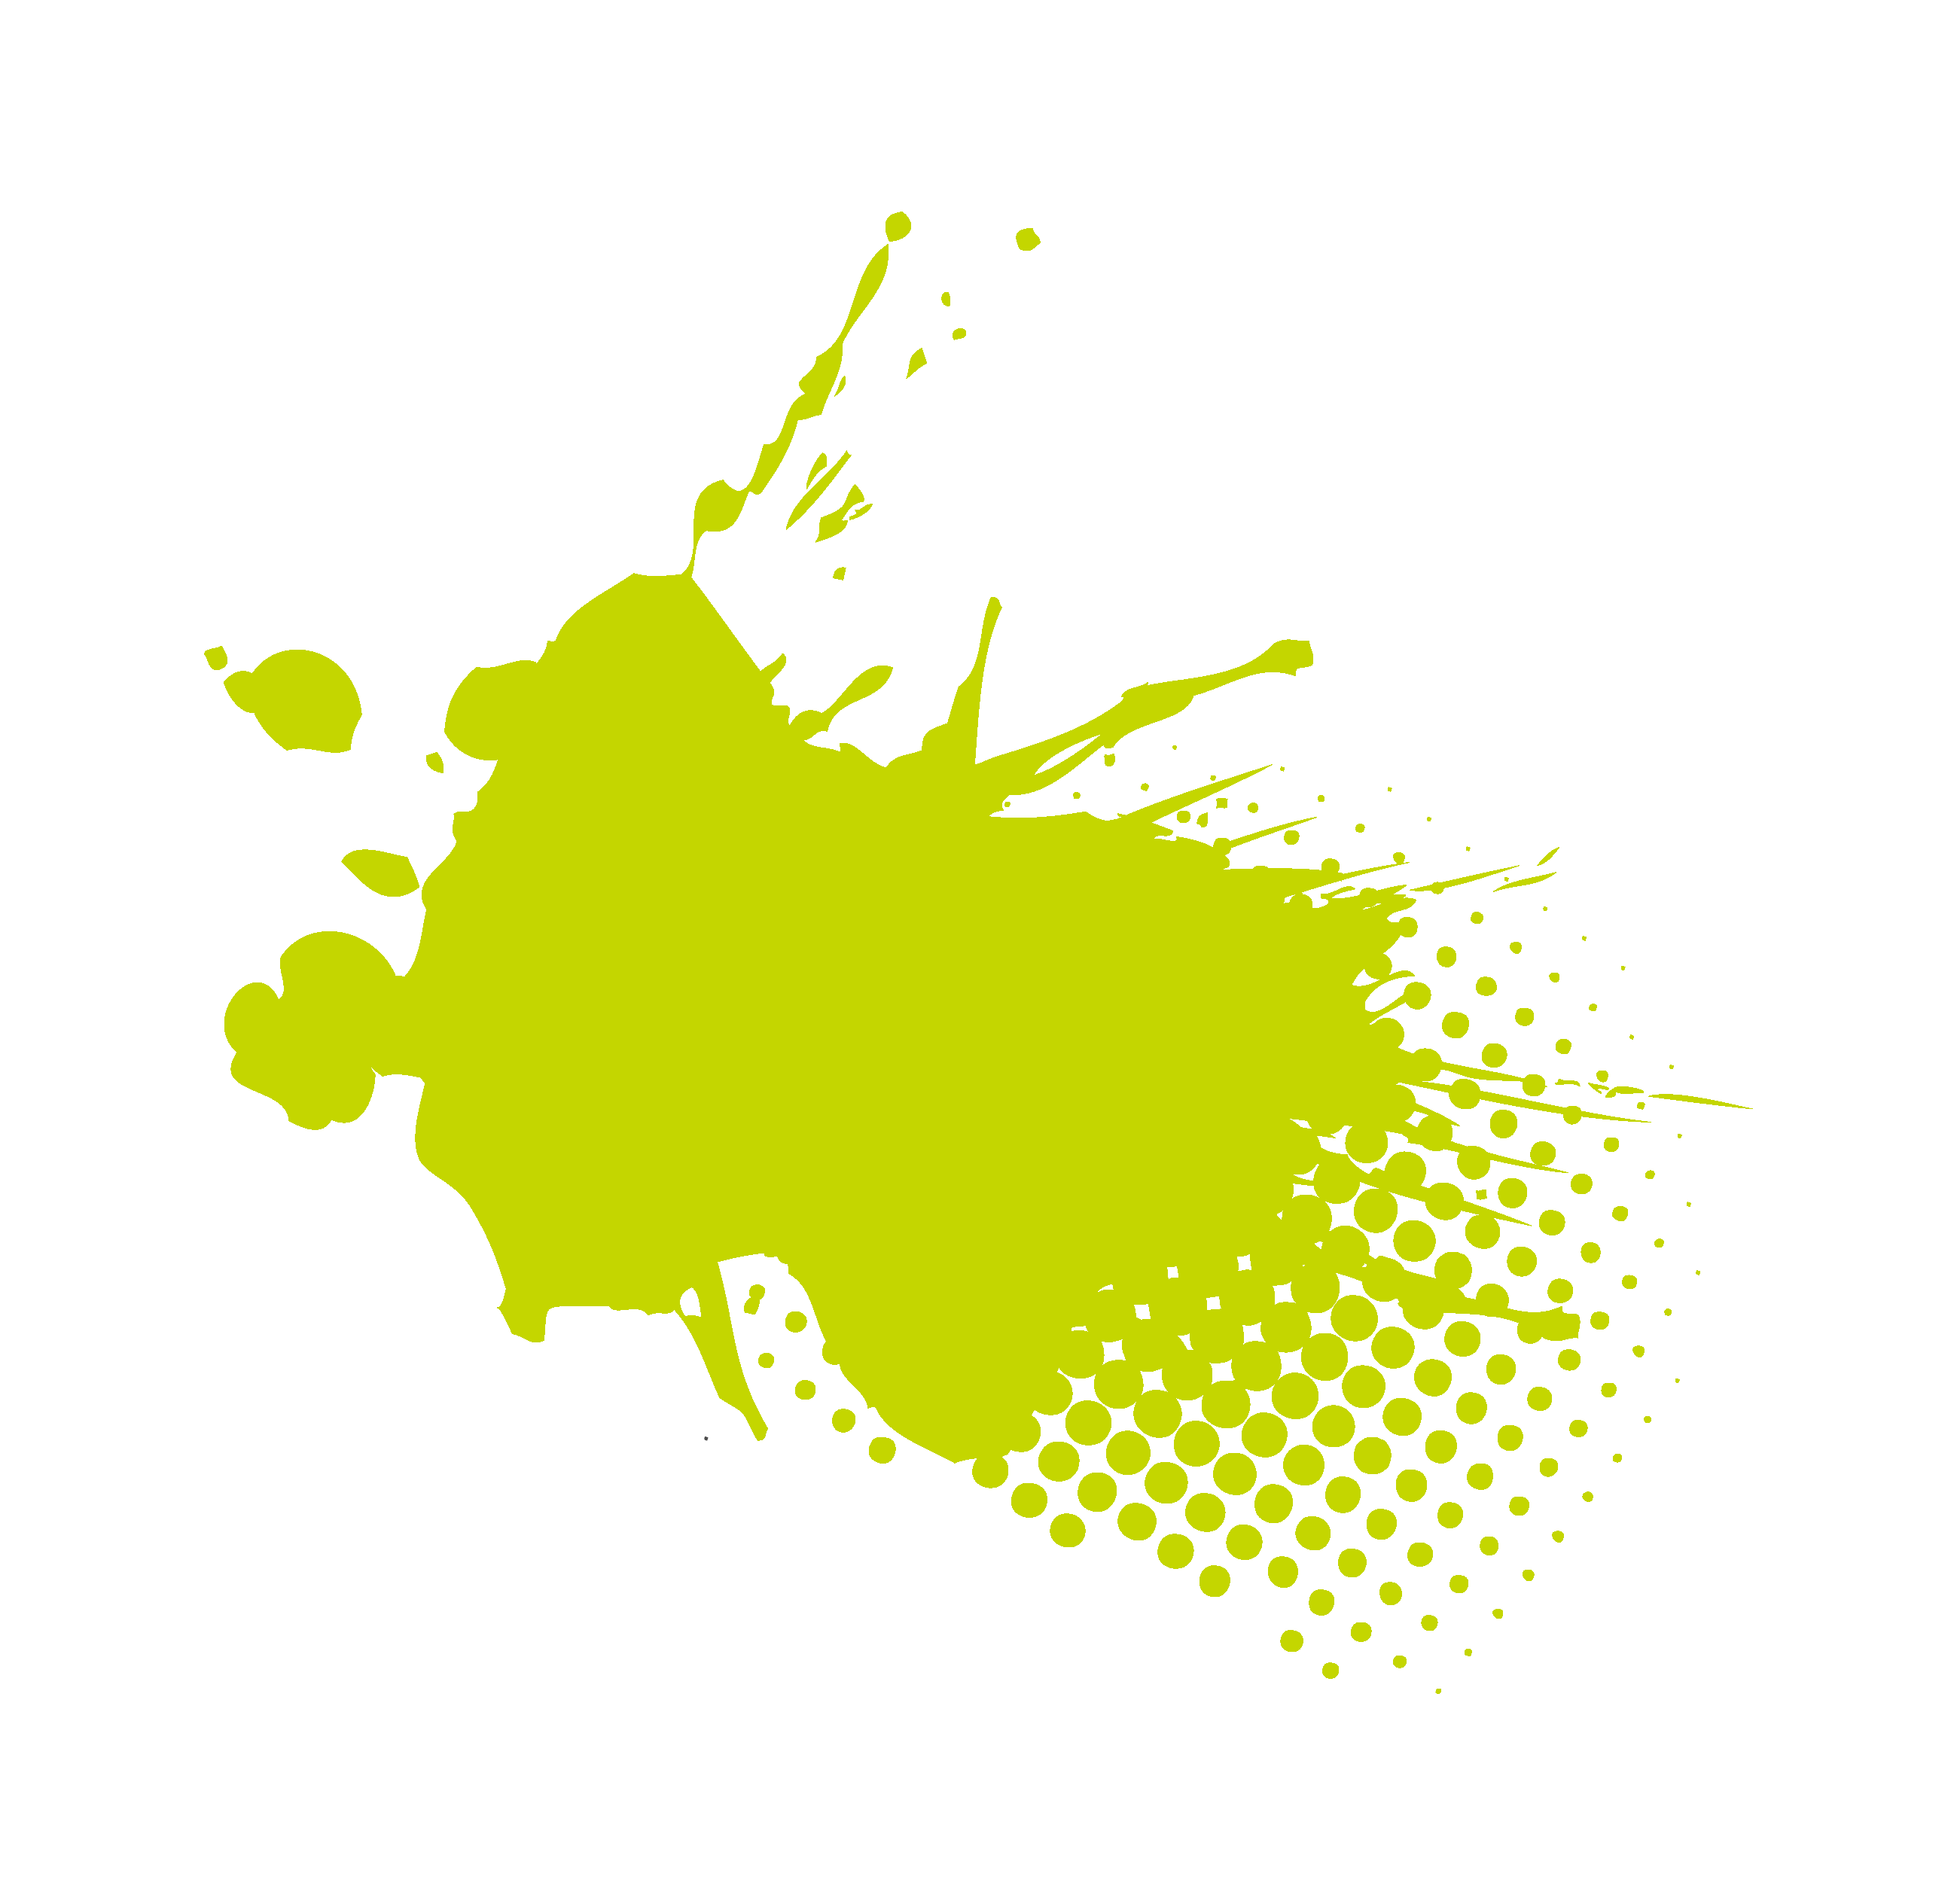 Image showing a green decorative paint splat